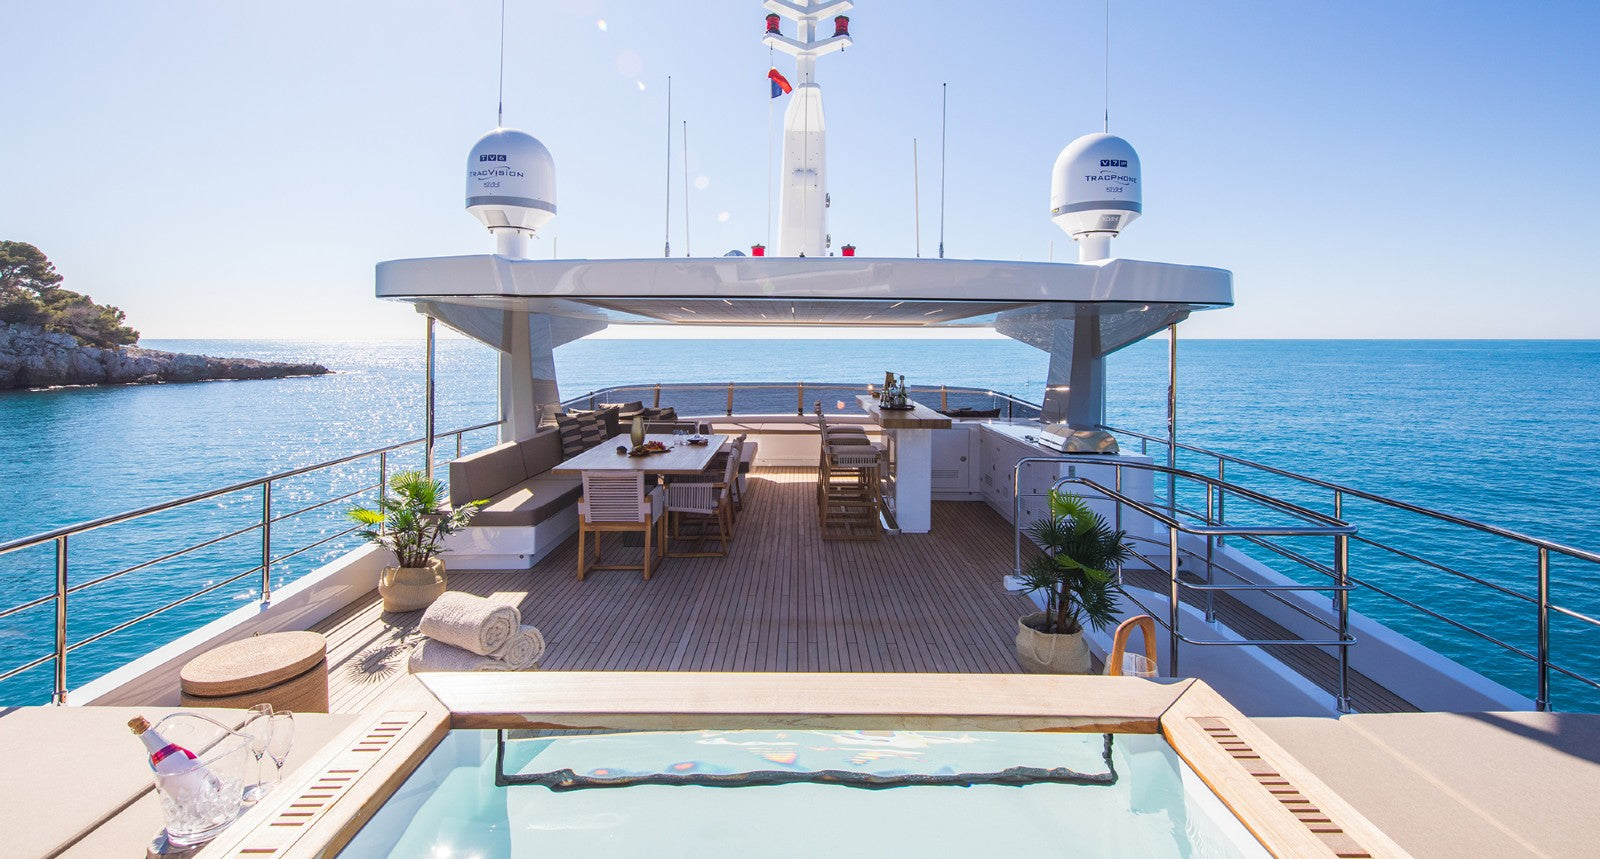 What makes a Yacht Charter Vacation so Luxurious?